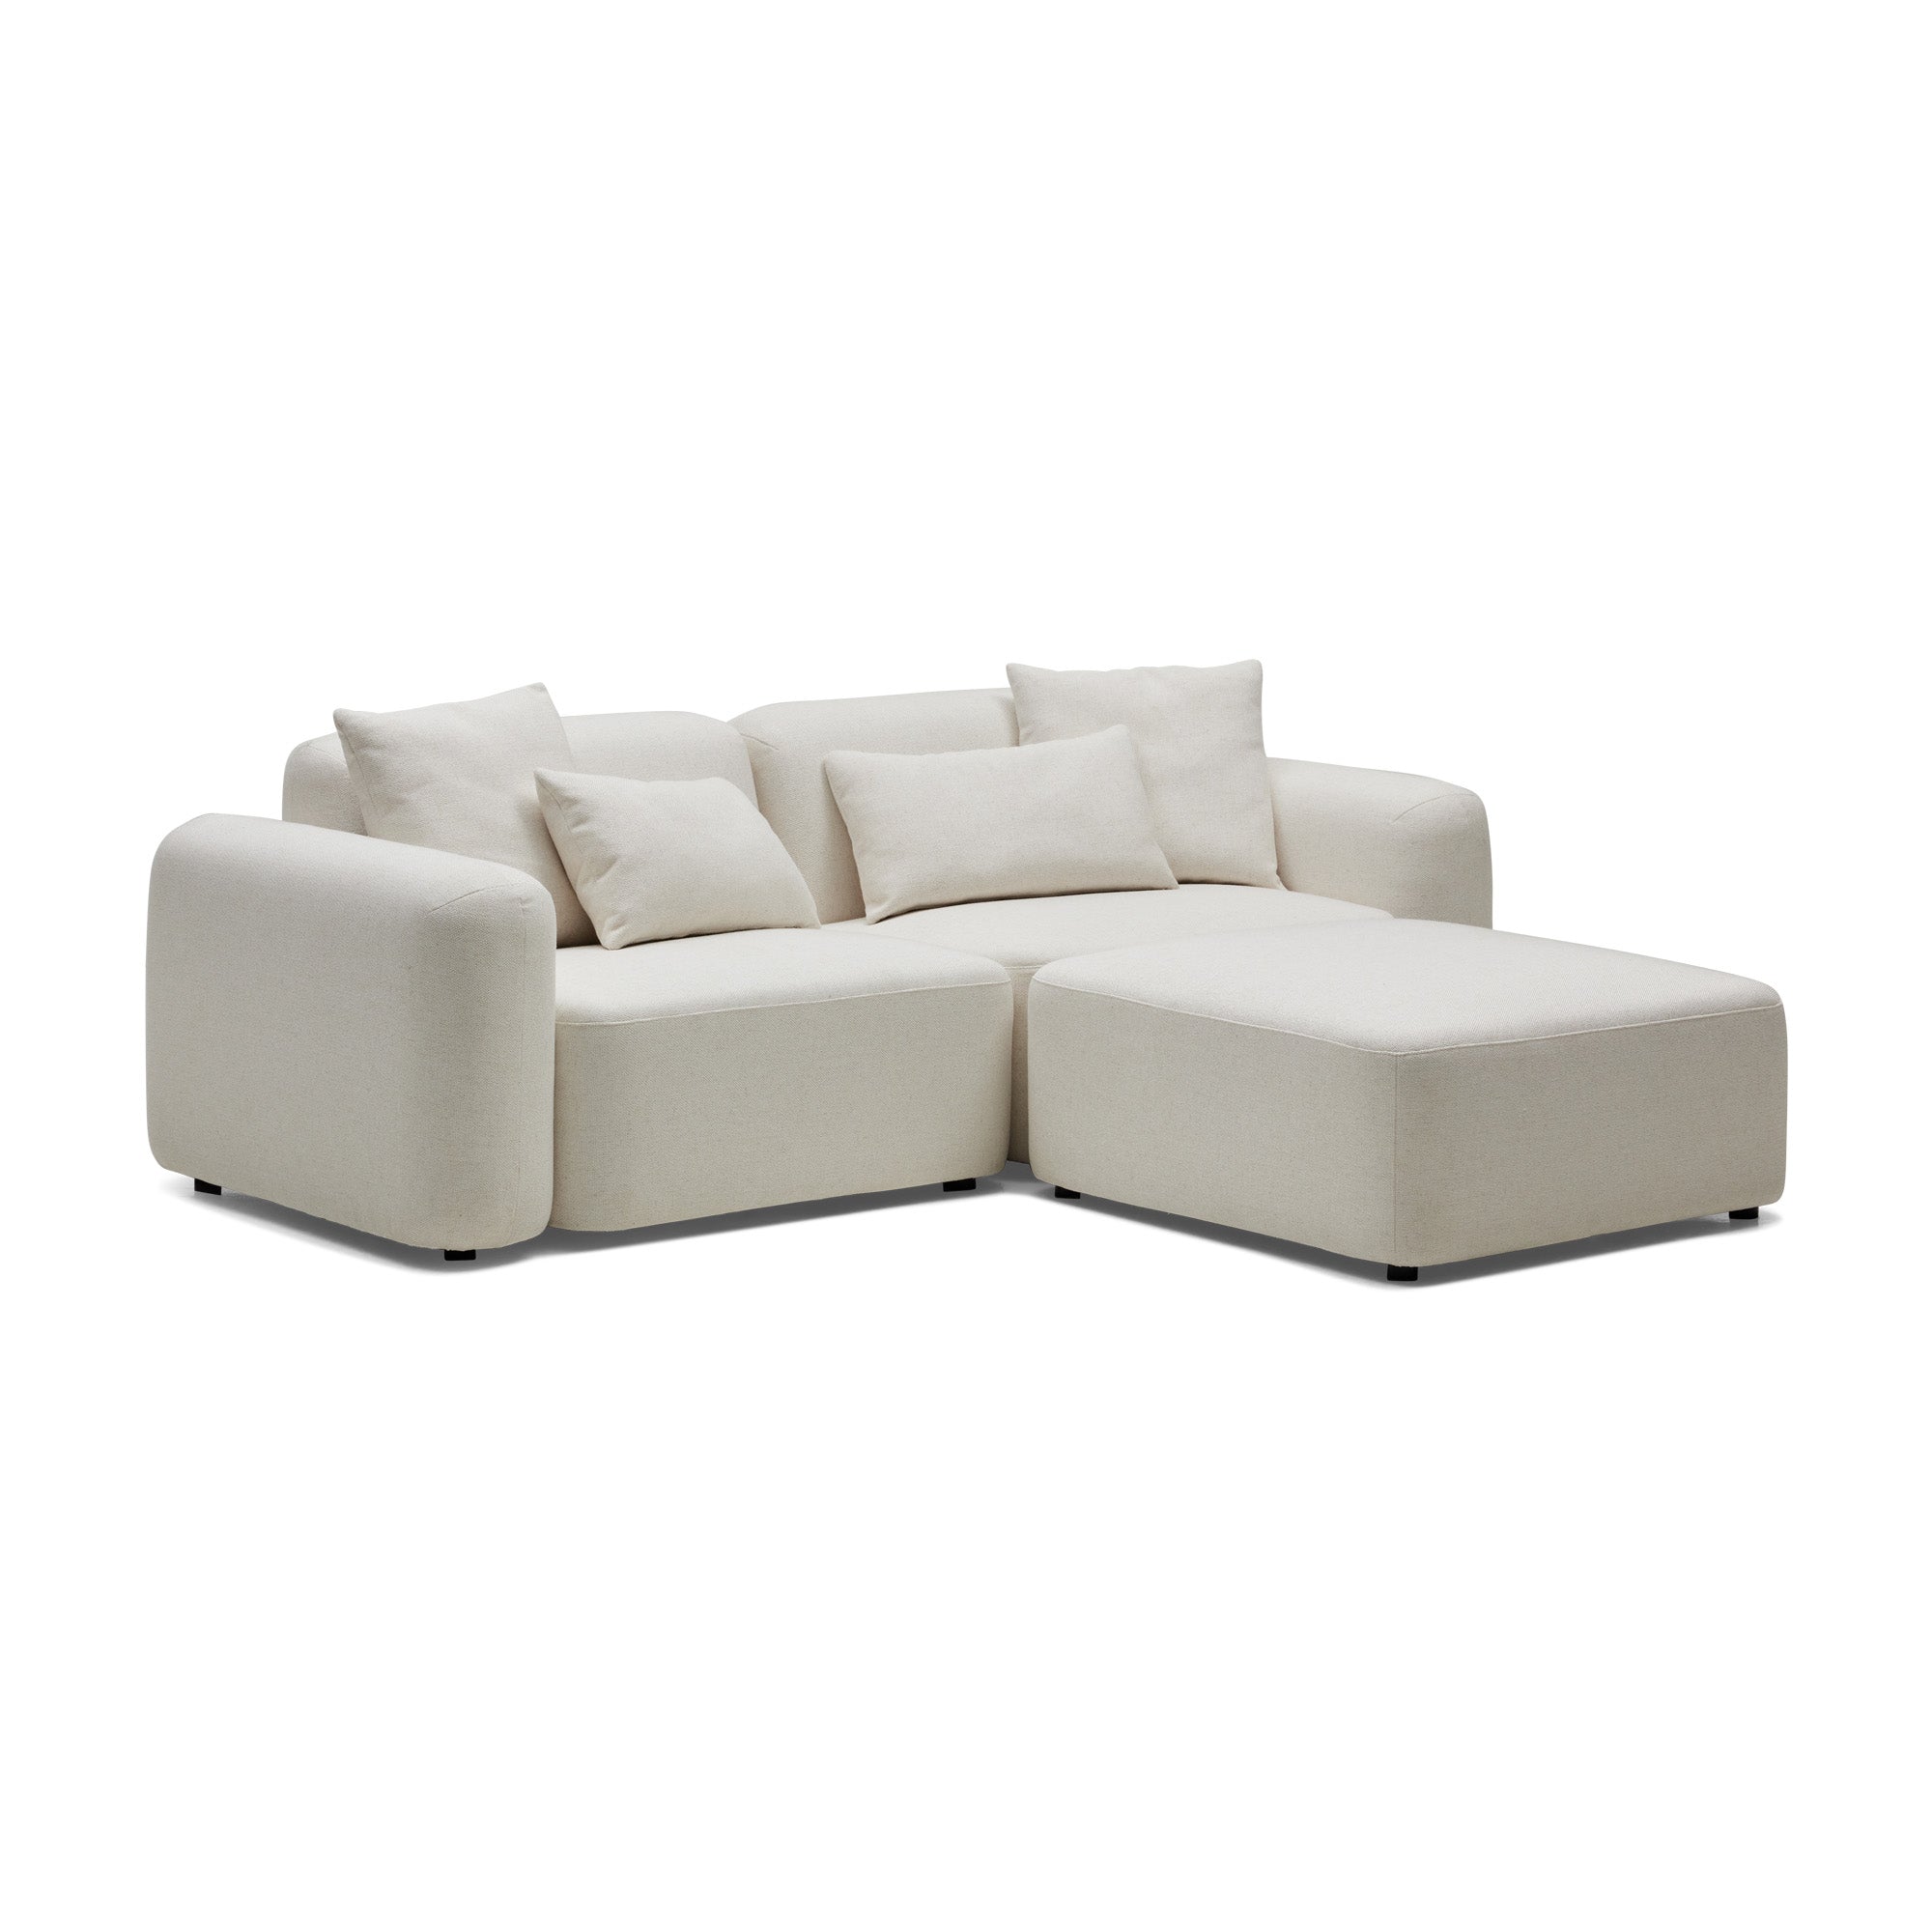 Pascal Modular Sofa Ivory 2 Seat Right Chaise